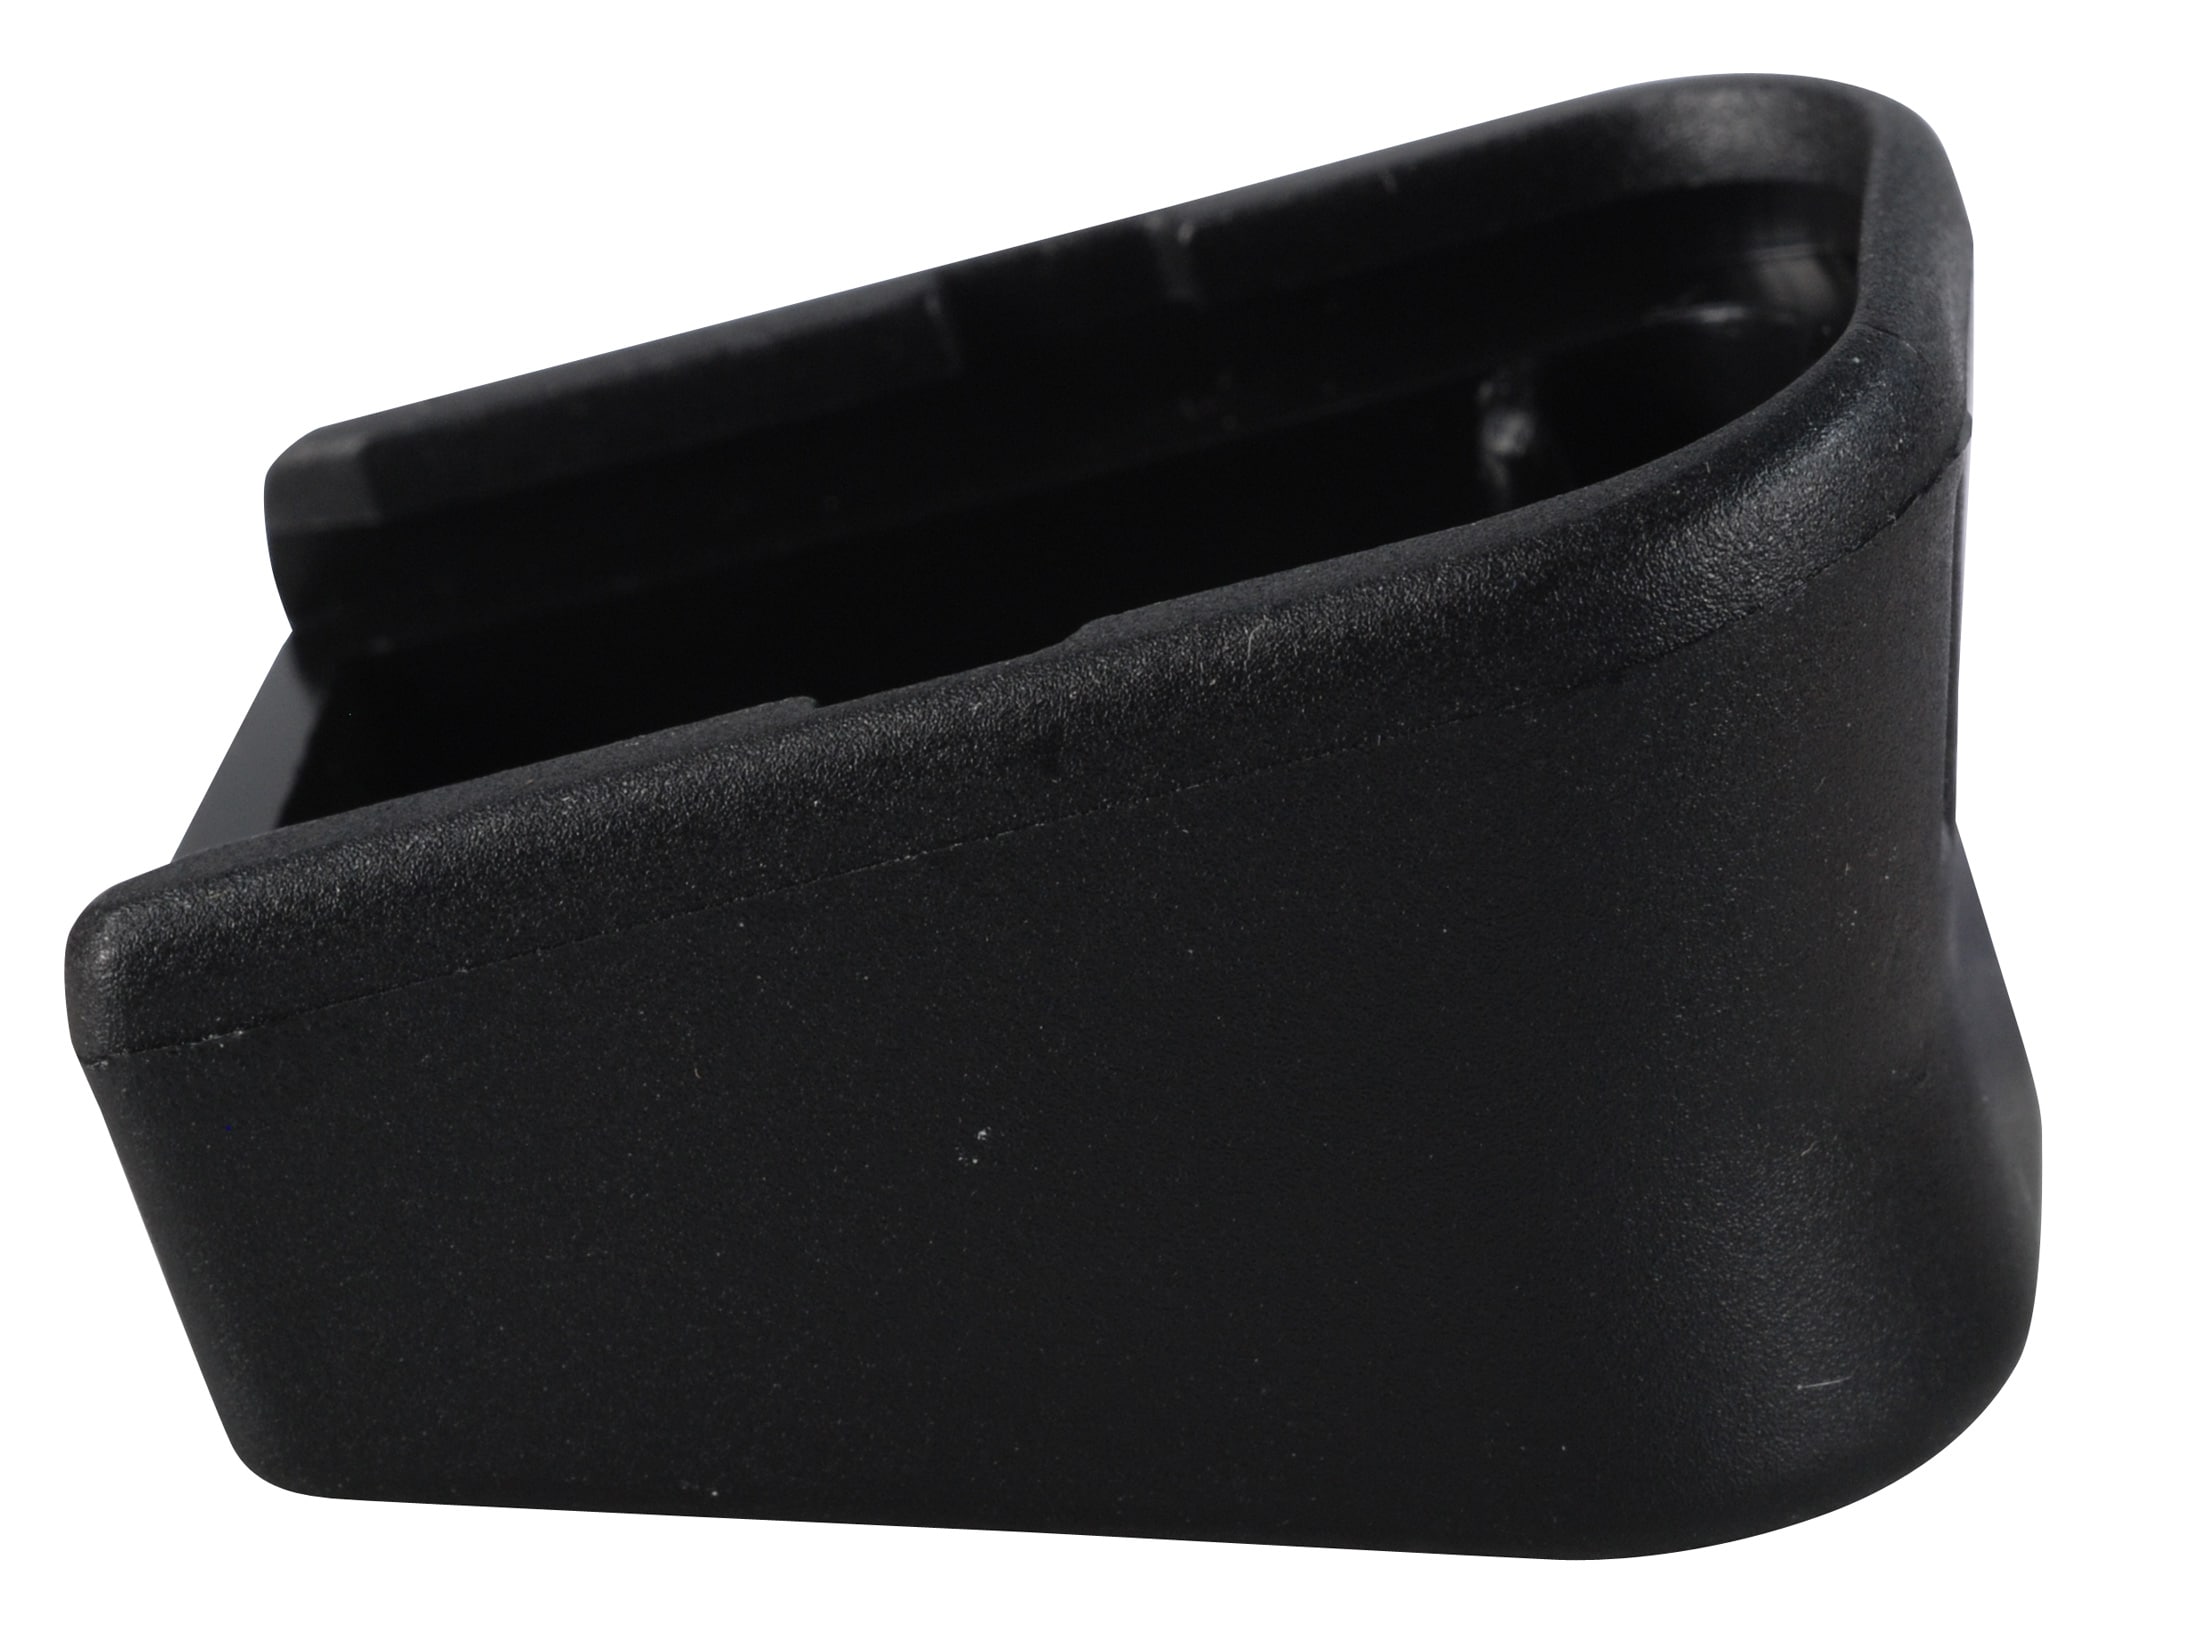 2 Magazine Extension For GLOCK 17 19 22 23 24 25 26 27 Glock Factory 